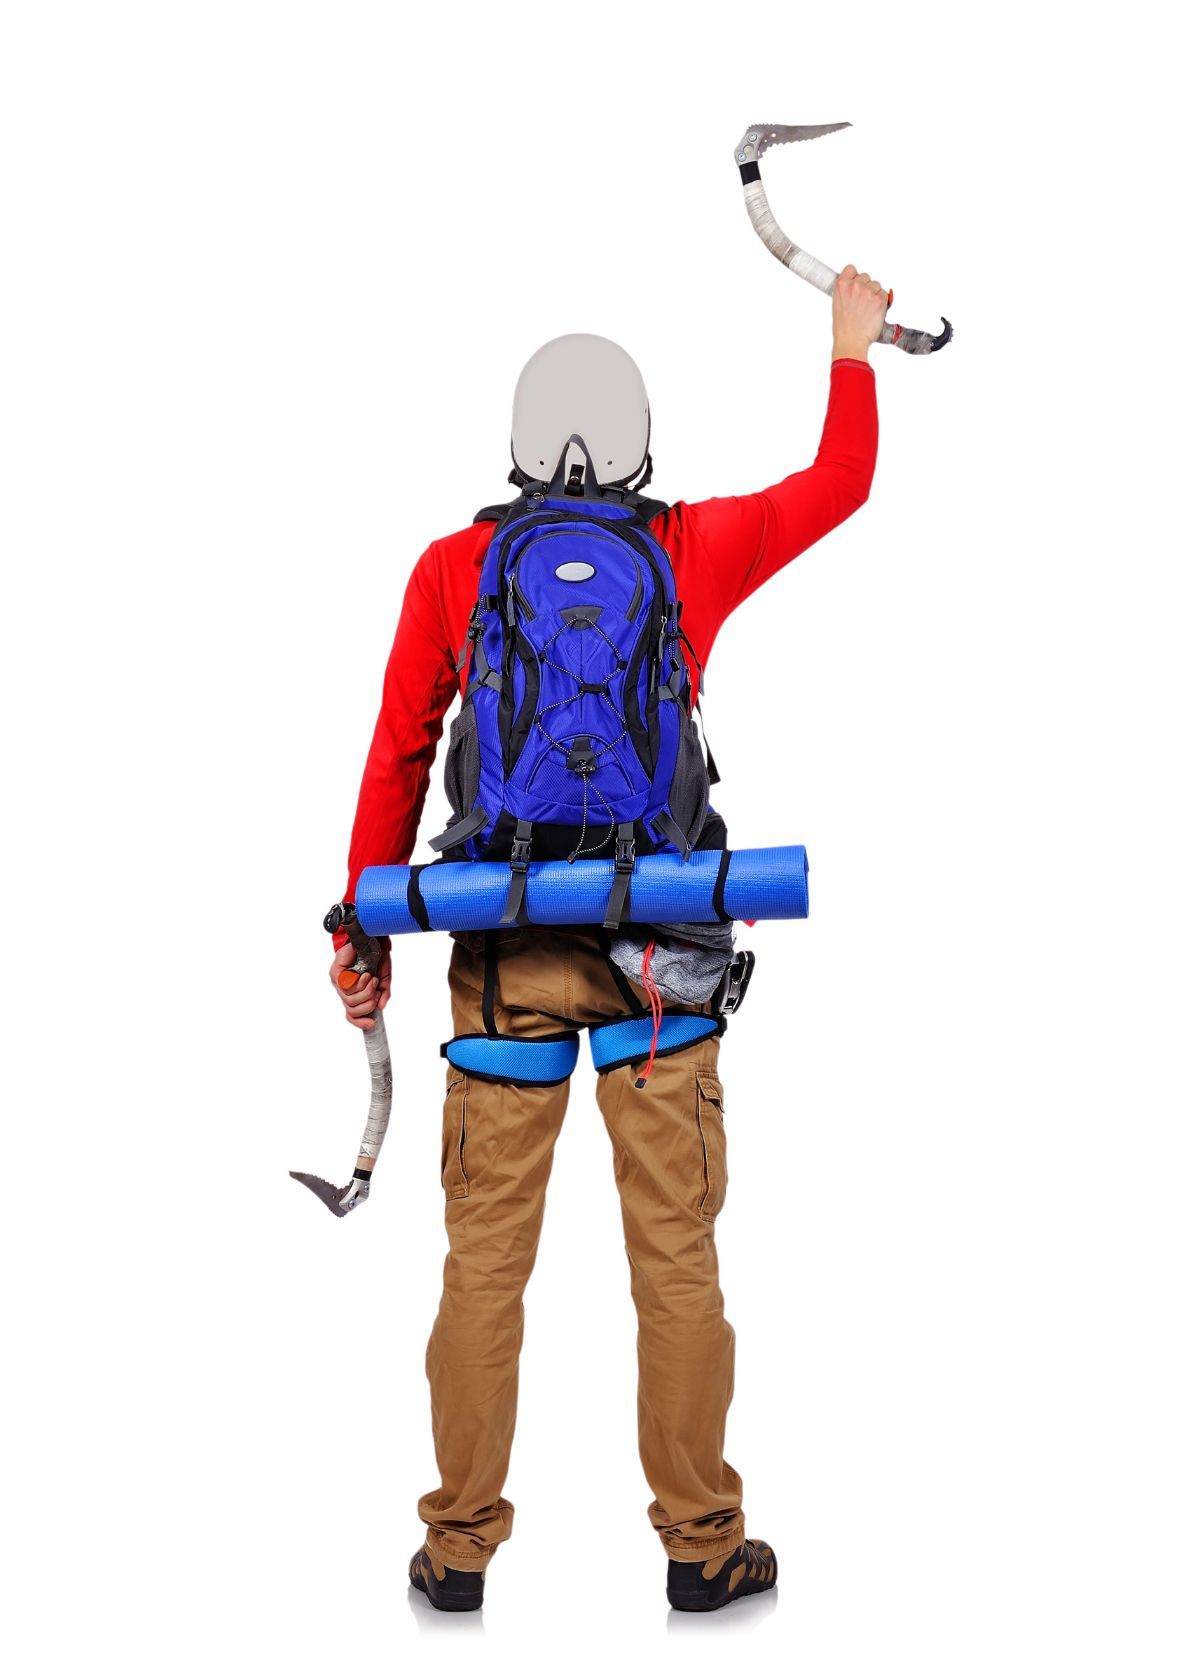 How to Attach Ice Axe to Backpack